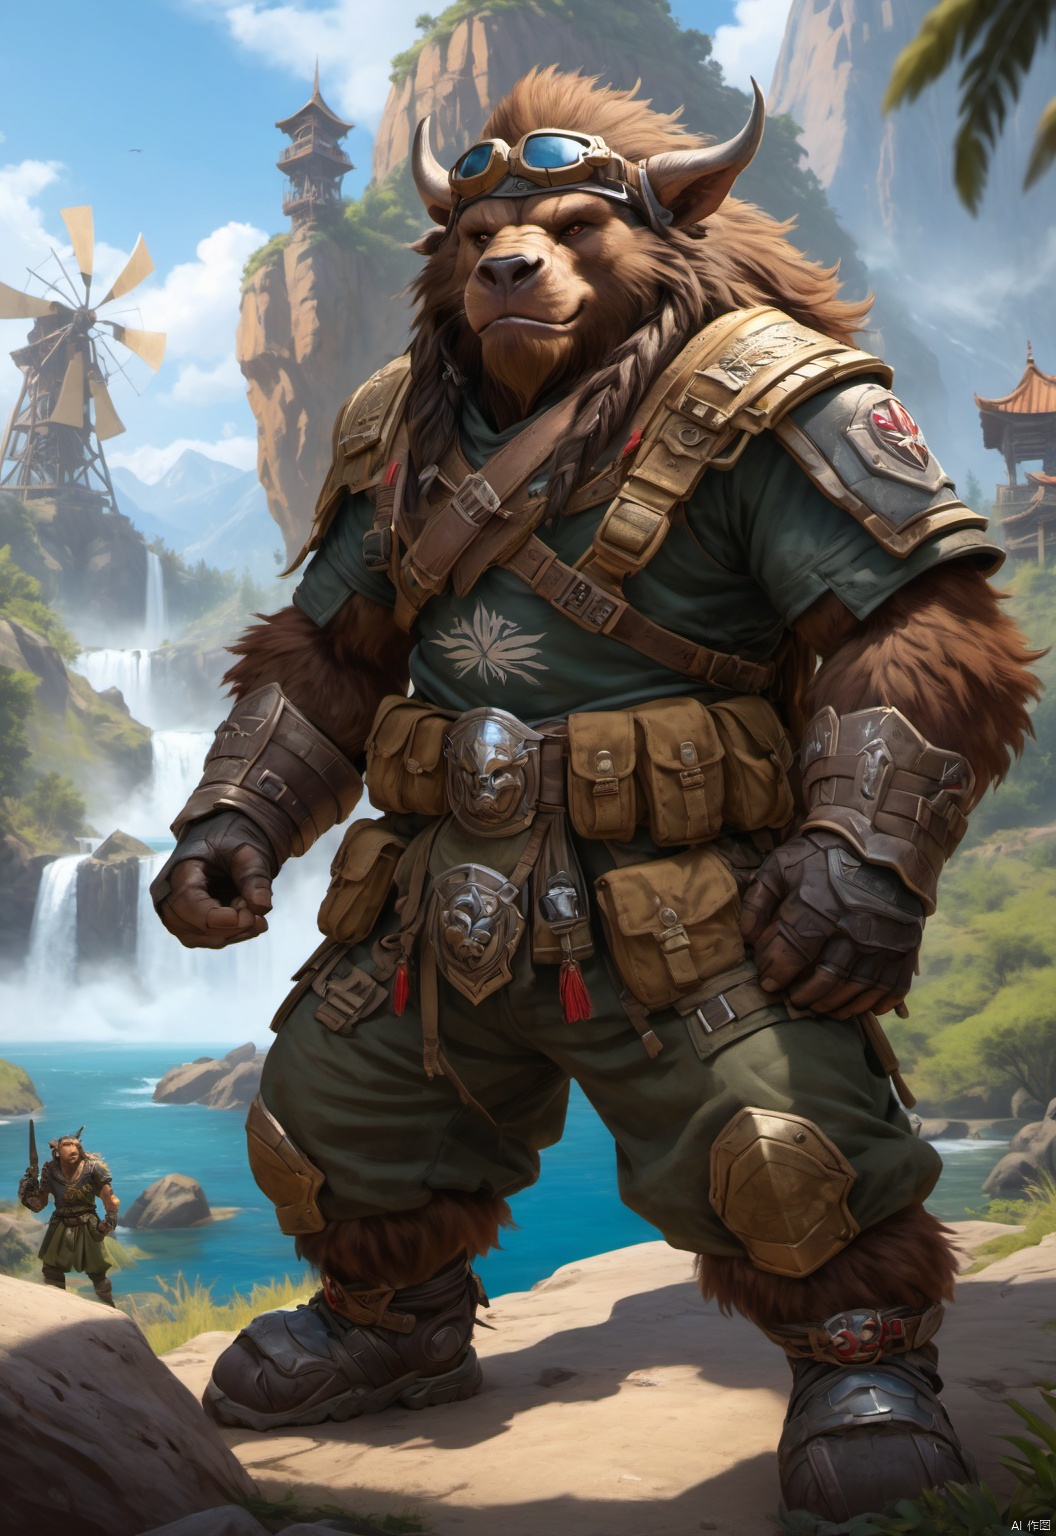 Tauren,Trapezius,Baine Bloodhoof,guerilla,    Mighty figure,cap,Tactical vest,The Tauren wears a green military cap,gun, sweat,Fluffy hair,Golden pupils,Thick eyebrows,furry,humpty dumpty,hairy,plait,Hoof,Clothing on the chest,feather,shaman,robust,their tails,Hair all over the body,                        Tauren in special forces combat uniform,Body armor,Camouflage dress-up,Wear a shirt,Tactical vests,Tauren wearing combat uniforms,young,t-shirt,Wear loose-fitting camouflage cargo shorts,Camouflage pattern,The belly is wrapped in cloth,The abdomen is covered with cloth,Congo,   Sunscreen hats,Shoulder-mounted bazooka,                           The short-sleeved color is single,Battle vests,girdle,Body armor,Tactical sandals,Baggy shorts,Wrap the ammunition  pouch  around the  abdomen,closed mouth,Gentle expression,Iconic orc teeth,The lower jaw has two fangs that grow upwards,Wrap the leggings around the calves with strips of cloth,burlap,Overall clothes,Urban camouflage combat shorts,beard,kind,Modern clothing,peaceful expression,chunky,Mountaineering watches,Ammunition pouches,pointed ears,white  short                            sleeve,brown face,relic,                   animal teeth,short_pants,honest,fat,gaiters,contemporary,Armed,stand    guard,peace,thick arms,thick thighs,Thick calves,camouflage shorts,Leg hair, Field Army,Full-length photo,Surrealism, from below, Nikon, Surrealism, backlighting, backlighting, cinematic lighting, 8k, super detail, high quality, high details, UHD, award winning, anatomically correct, UHD, retina, masterpiece, ccurate, anatomically correct, super detail, award winning, best quality,         high quality,              high details,                highres, 16k,Brown fur,strong,        Reasonable firearm construction,Different fantasy world races, With a gun on his back,huggymale,Rich background characters,Complete laundry,complex background,The background is a messy crowd of people,A fun adventure,Movement process,holding weapon,full body,standing,The characters are in harmony with the environment,Palm trees,Huge windmills,Thunder Bluff,cliff,camp,Devil's Peak,Many military men,    Below the cliffs is the lake,In the middle of the lake was a warship,The Tauren stands on top of a cliff,destroyer,Sultry environment,waterfall,A city on a cliff, huggymale, Oouguancong